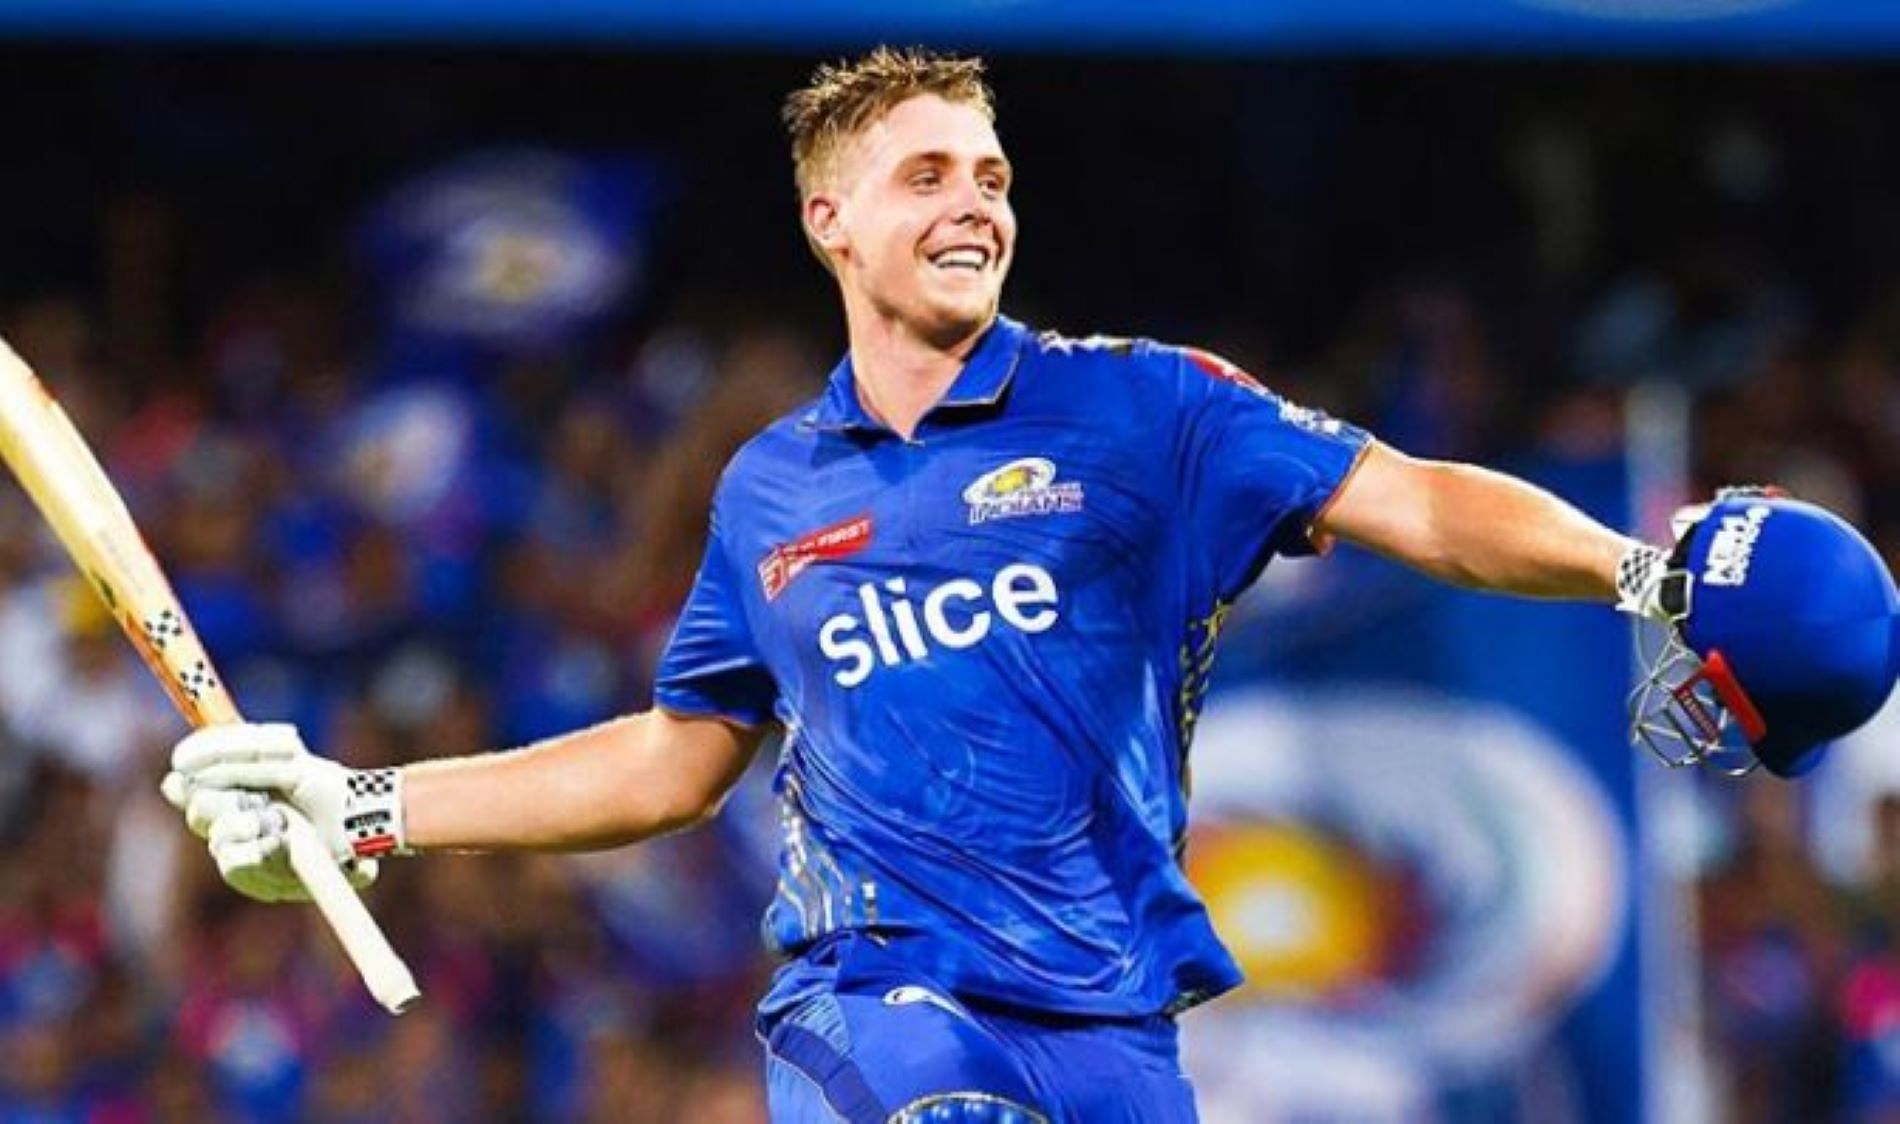 Green was sensational batting at the top order for the Mumbai Indians.